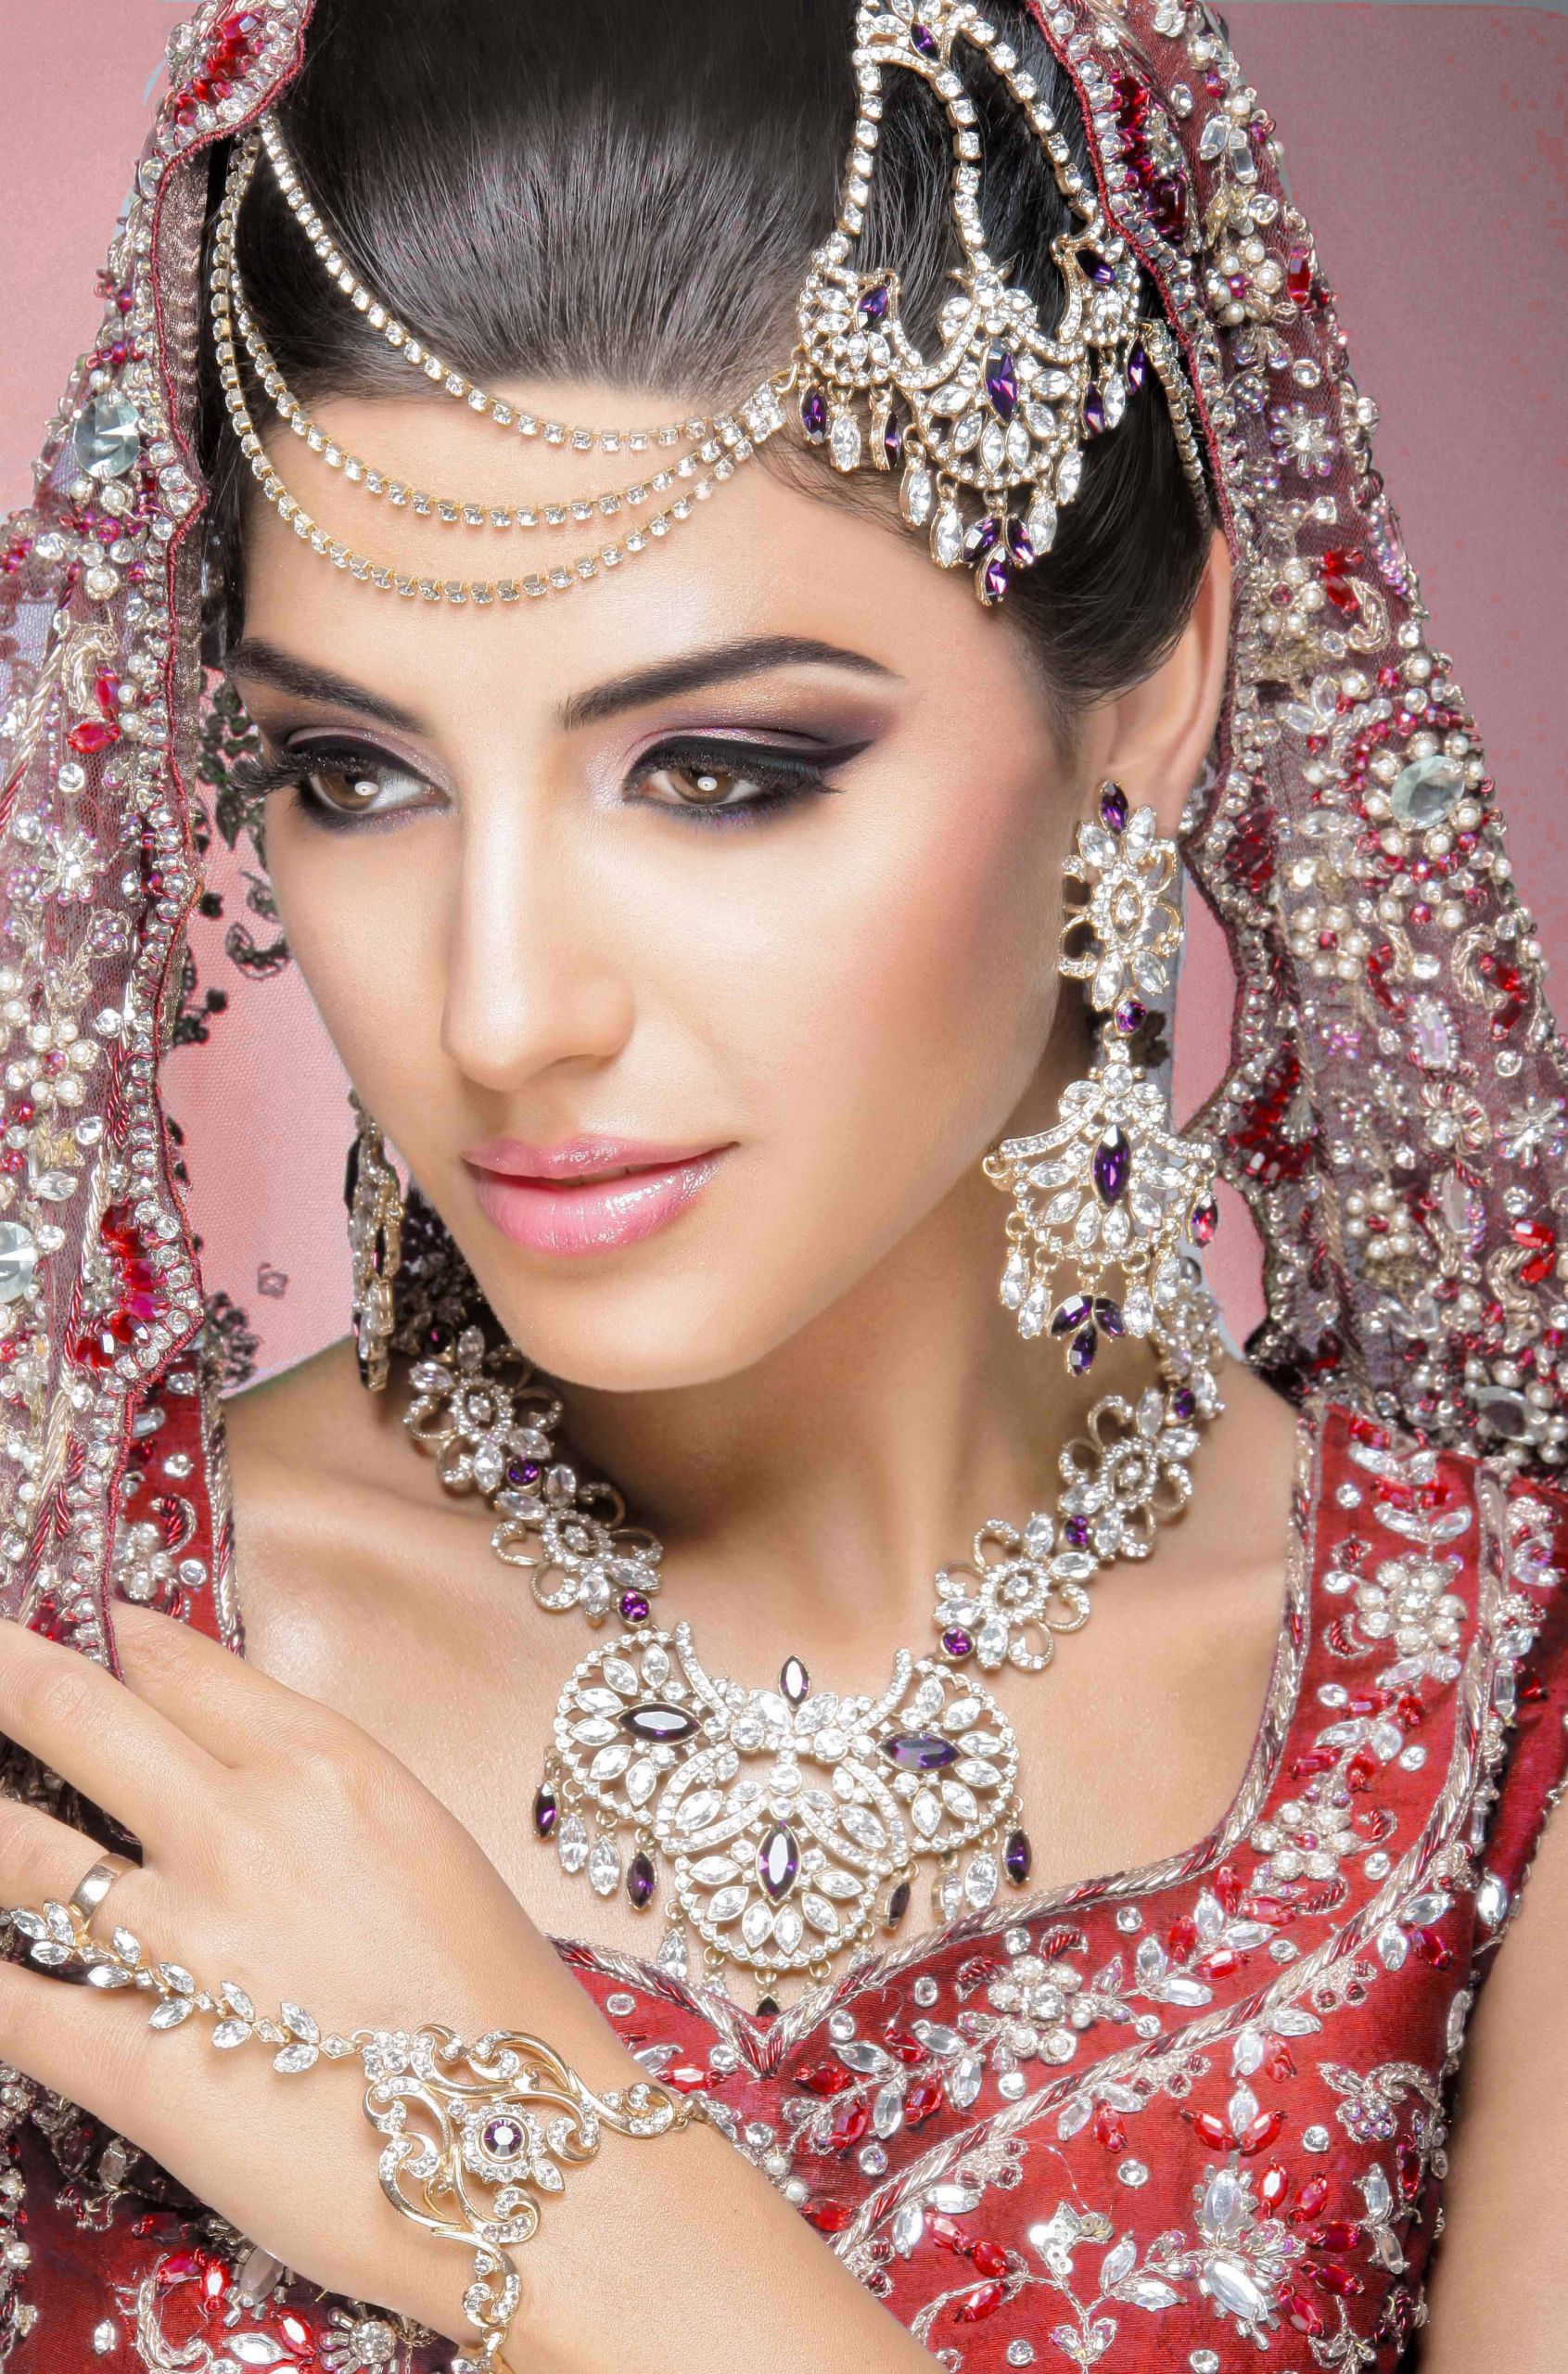 Bride Makeup Looks
 11 Simple Bridal Makeup tips for your Wedding